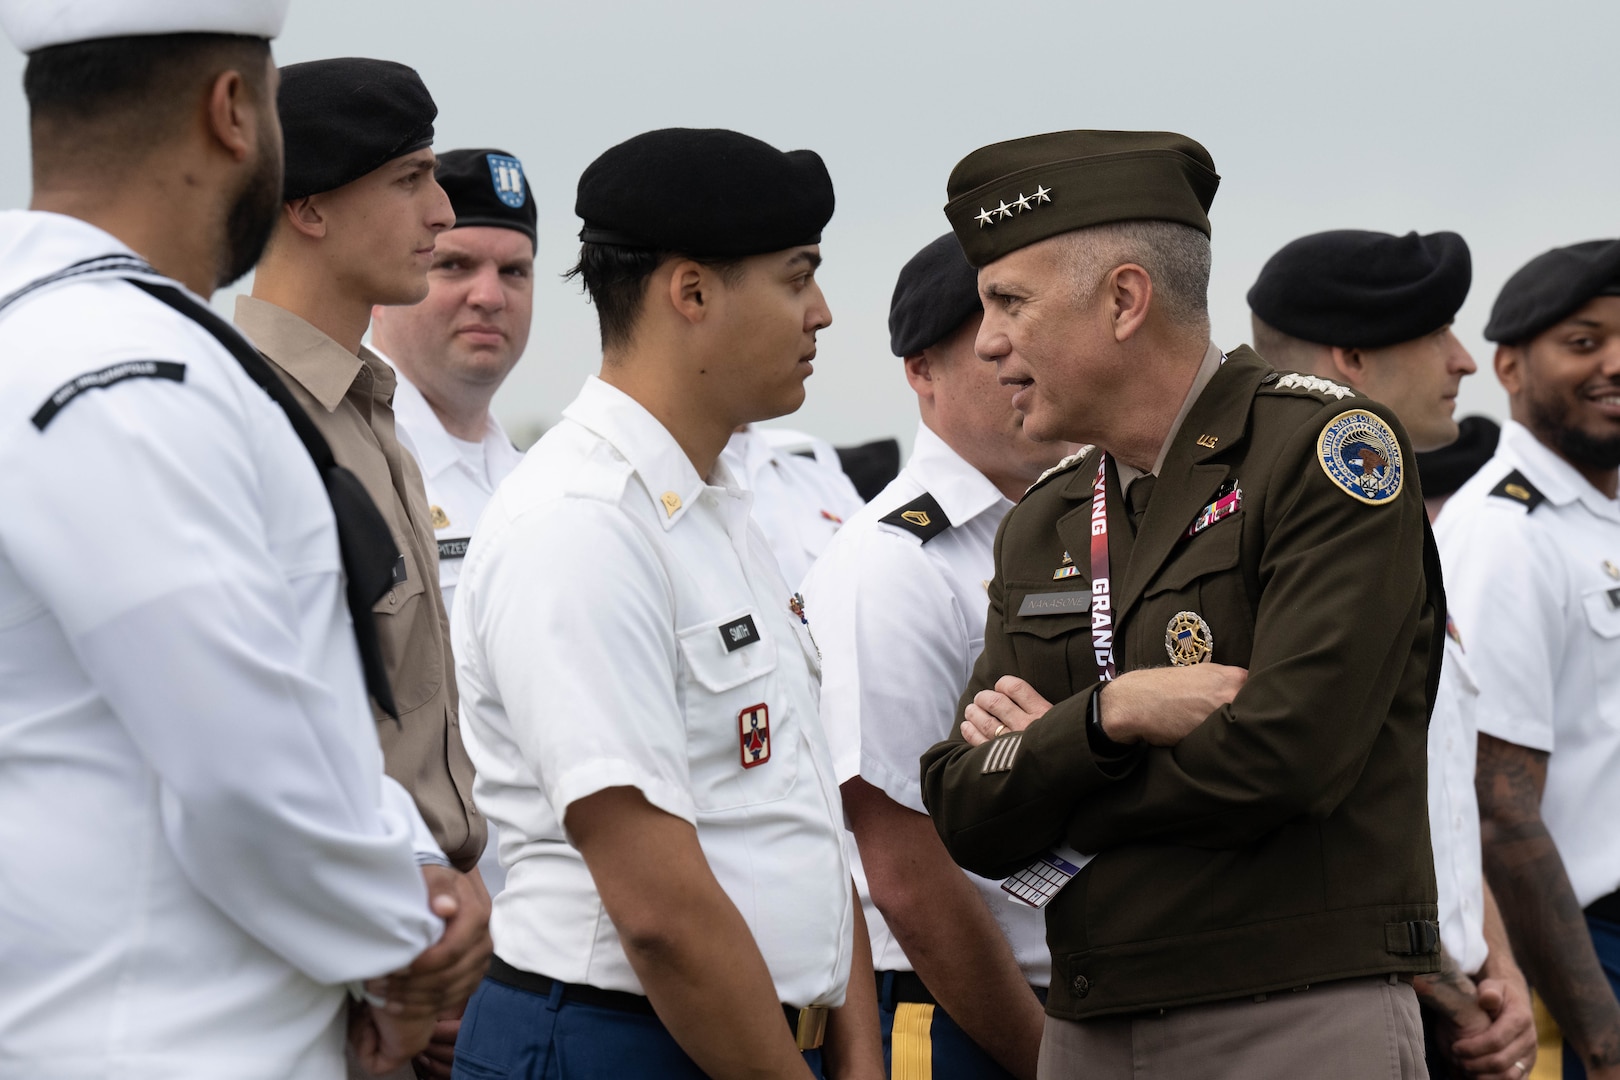 Two service members in uniform converse while standing near a group of men also in uniform.